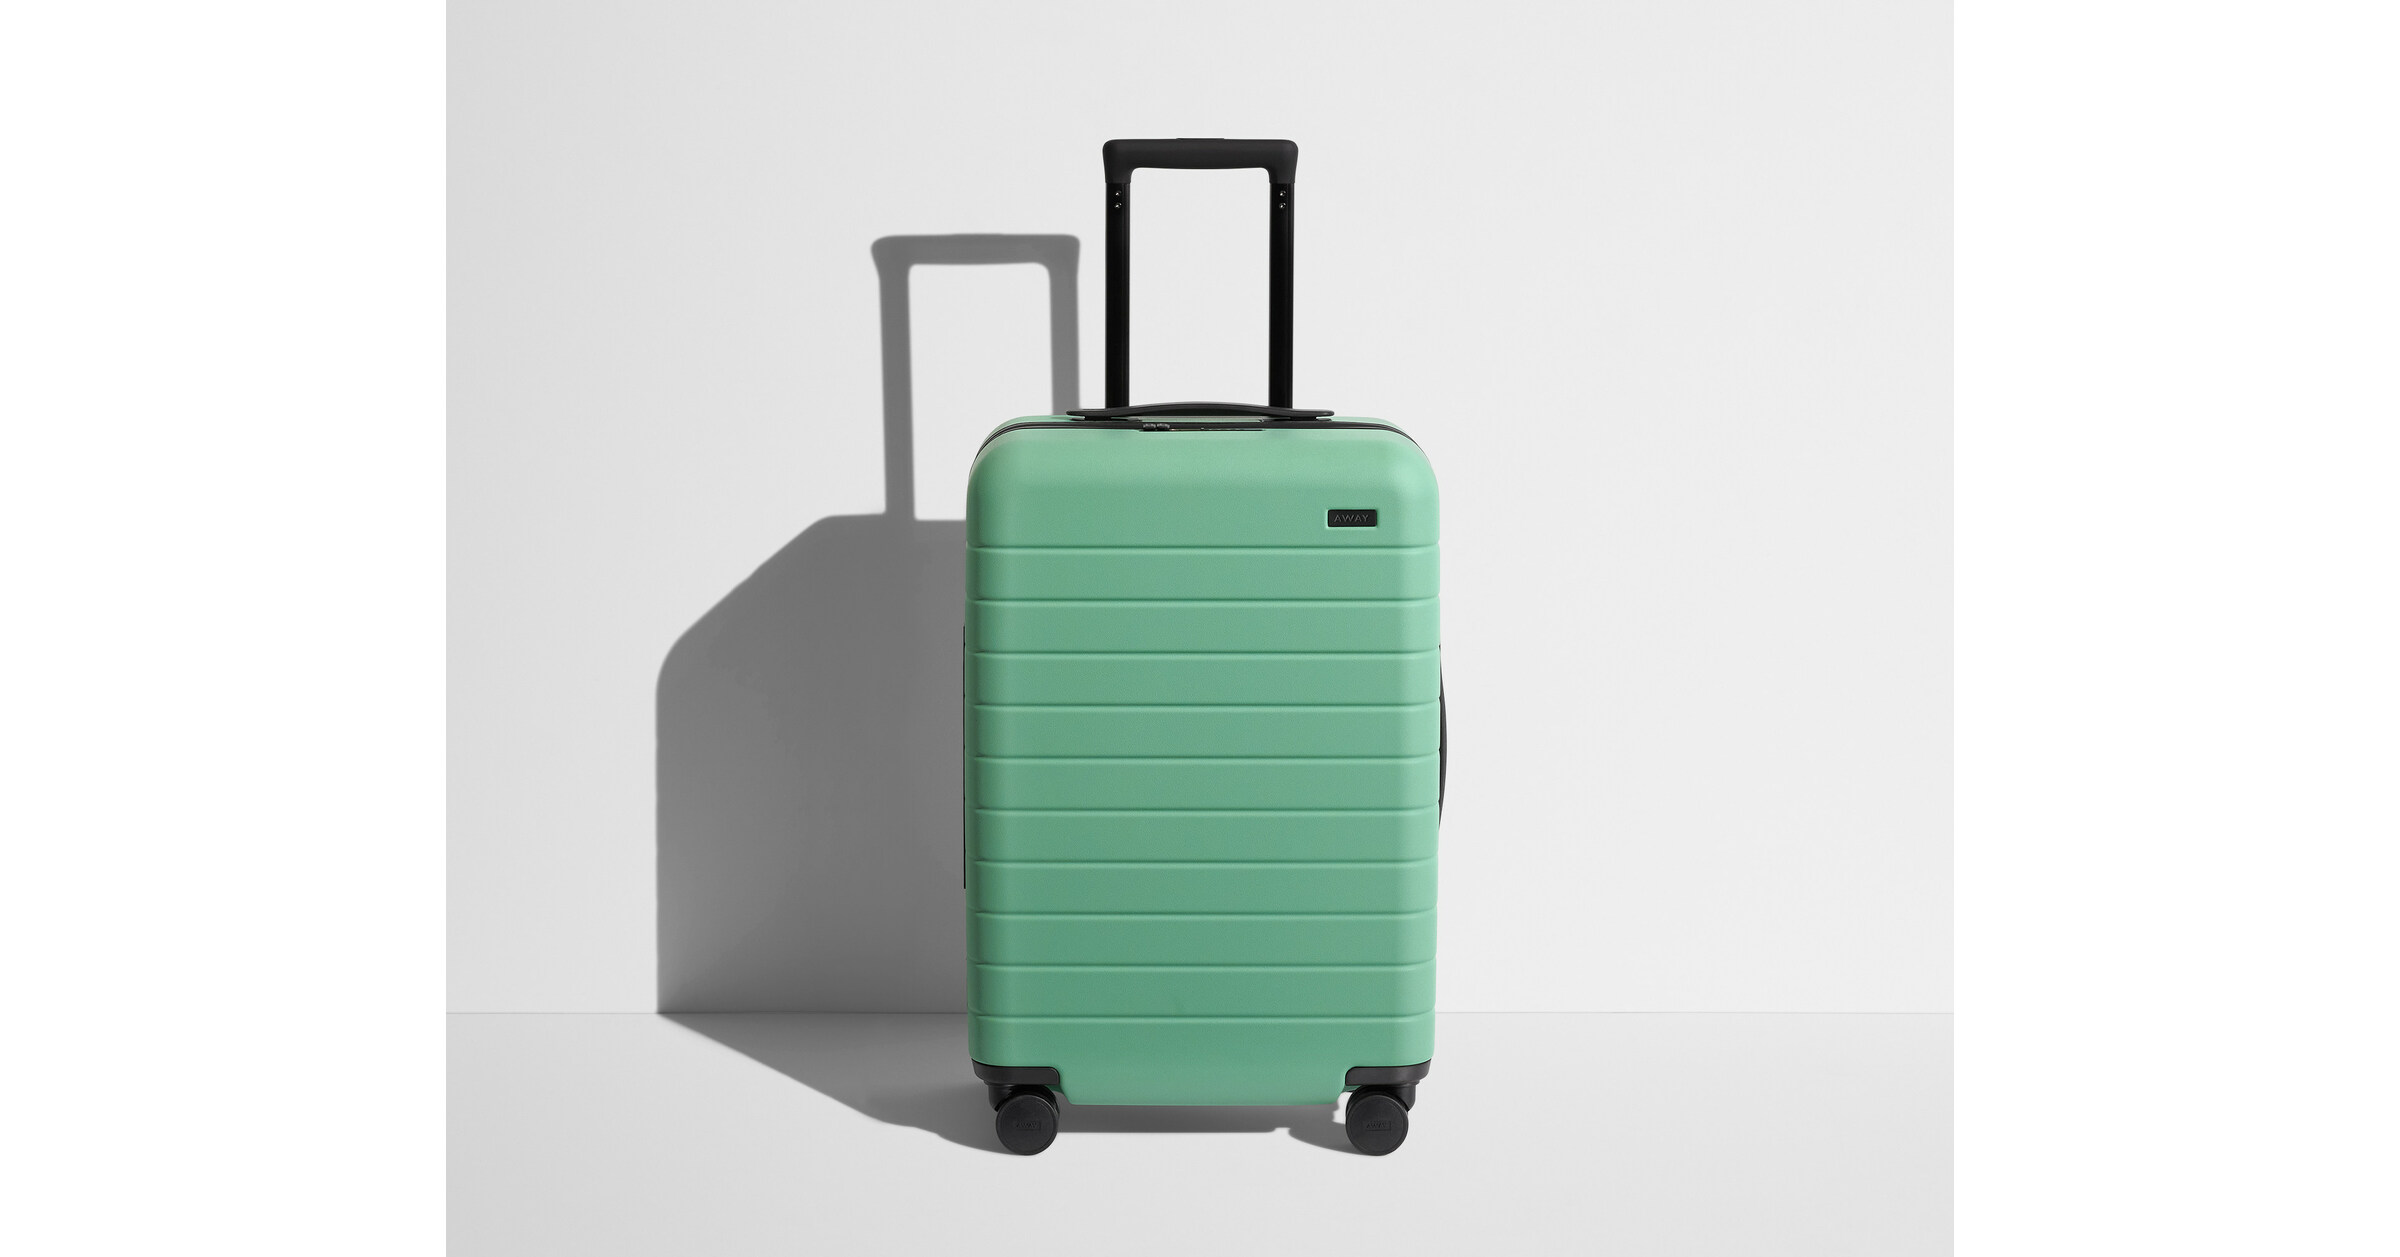 Away Luggage Just Released 3 Limited-Edition Suitcase Colors Inspired by  Retro Ski Style